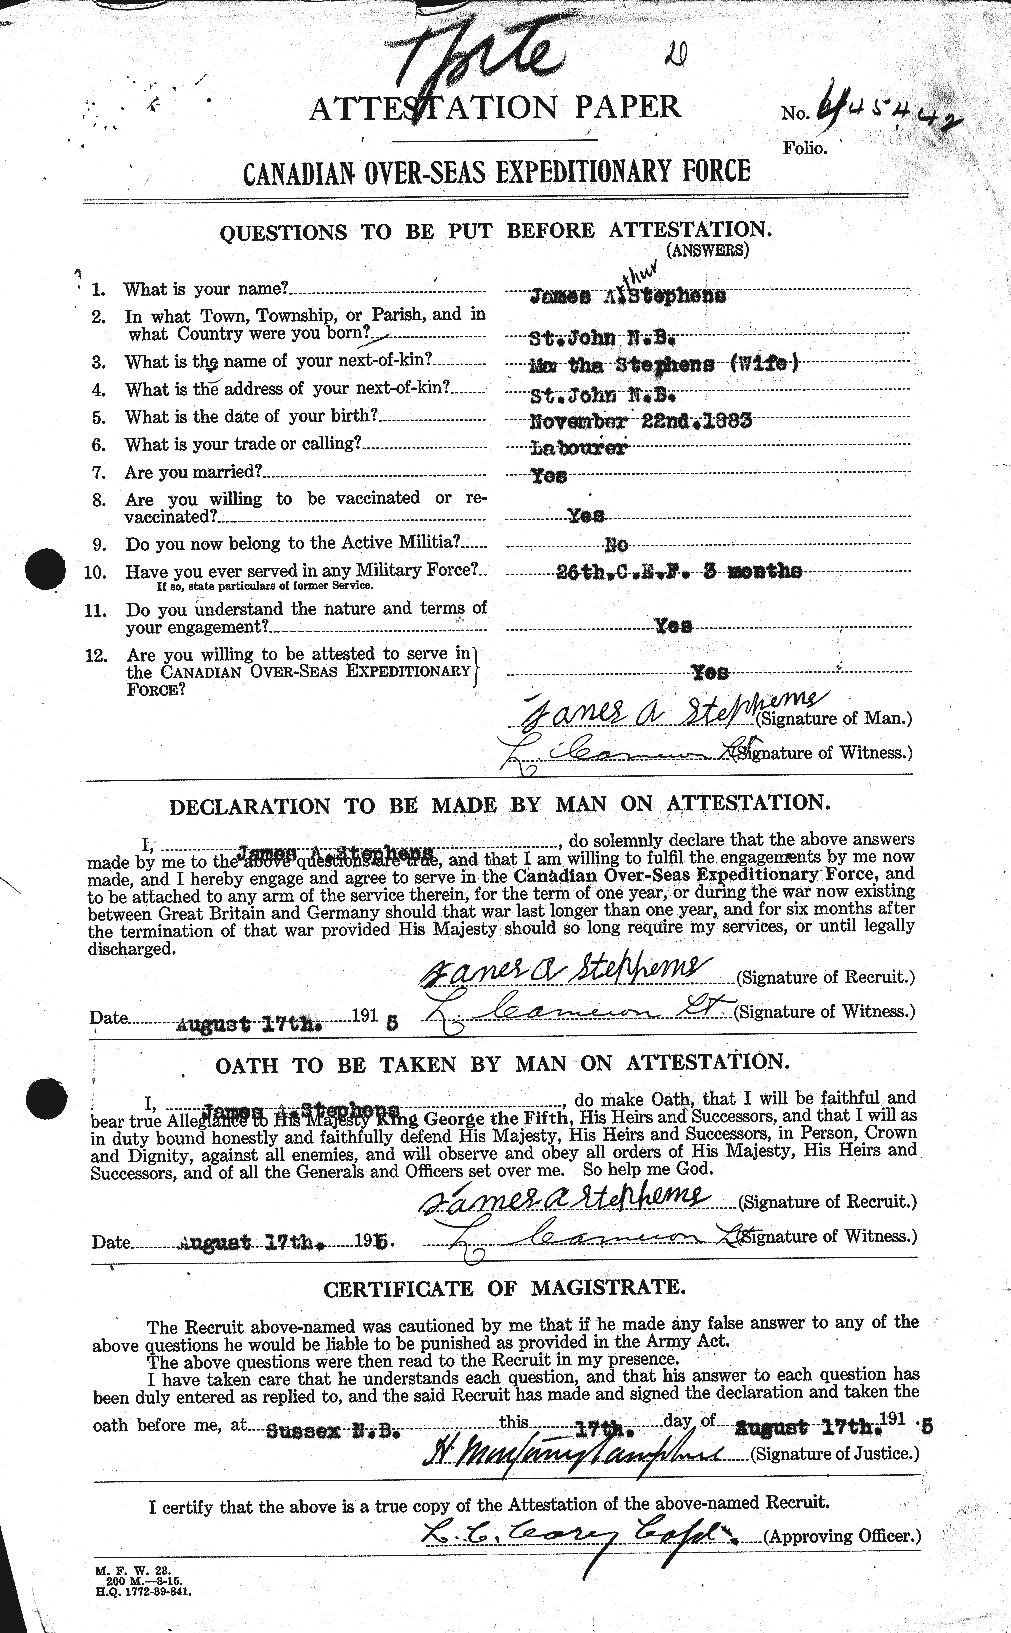 Personnel Records of the First World War - CEF 117809a